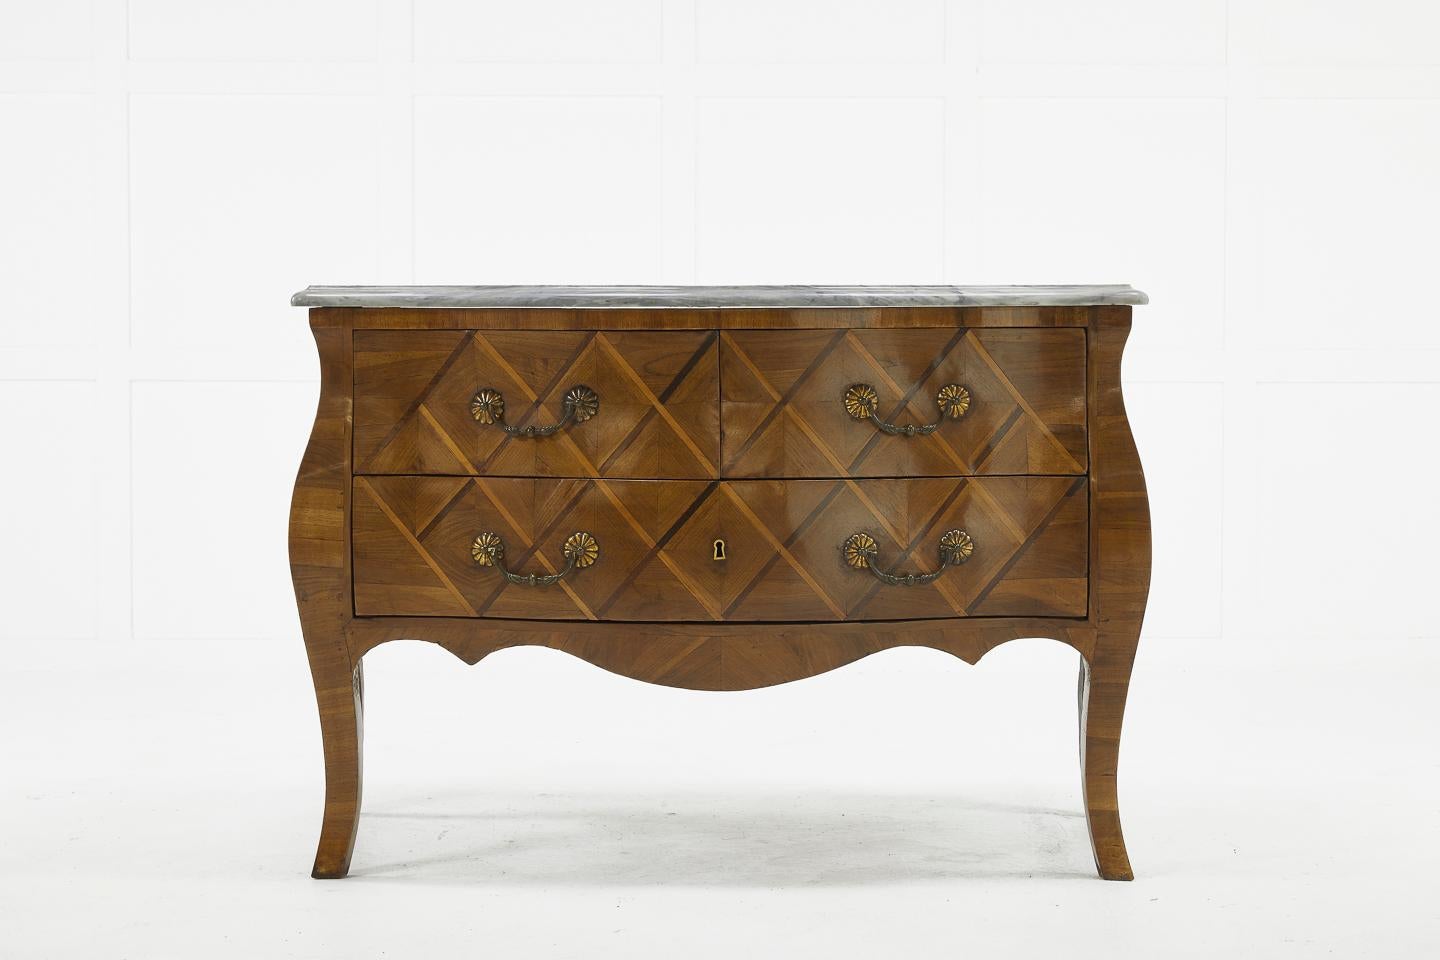 Shapely French 18th century walnut bombe commode with cabriole legs and marble top. Attractive diamond pattern parquetry inlay. Nice shape and form with decorative handles.
 